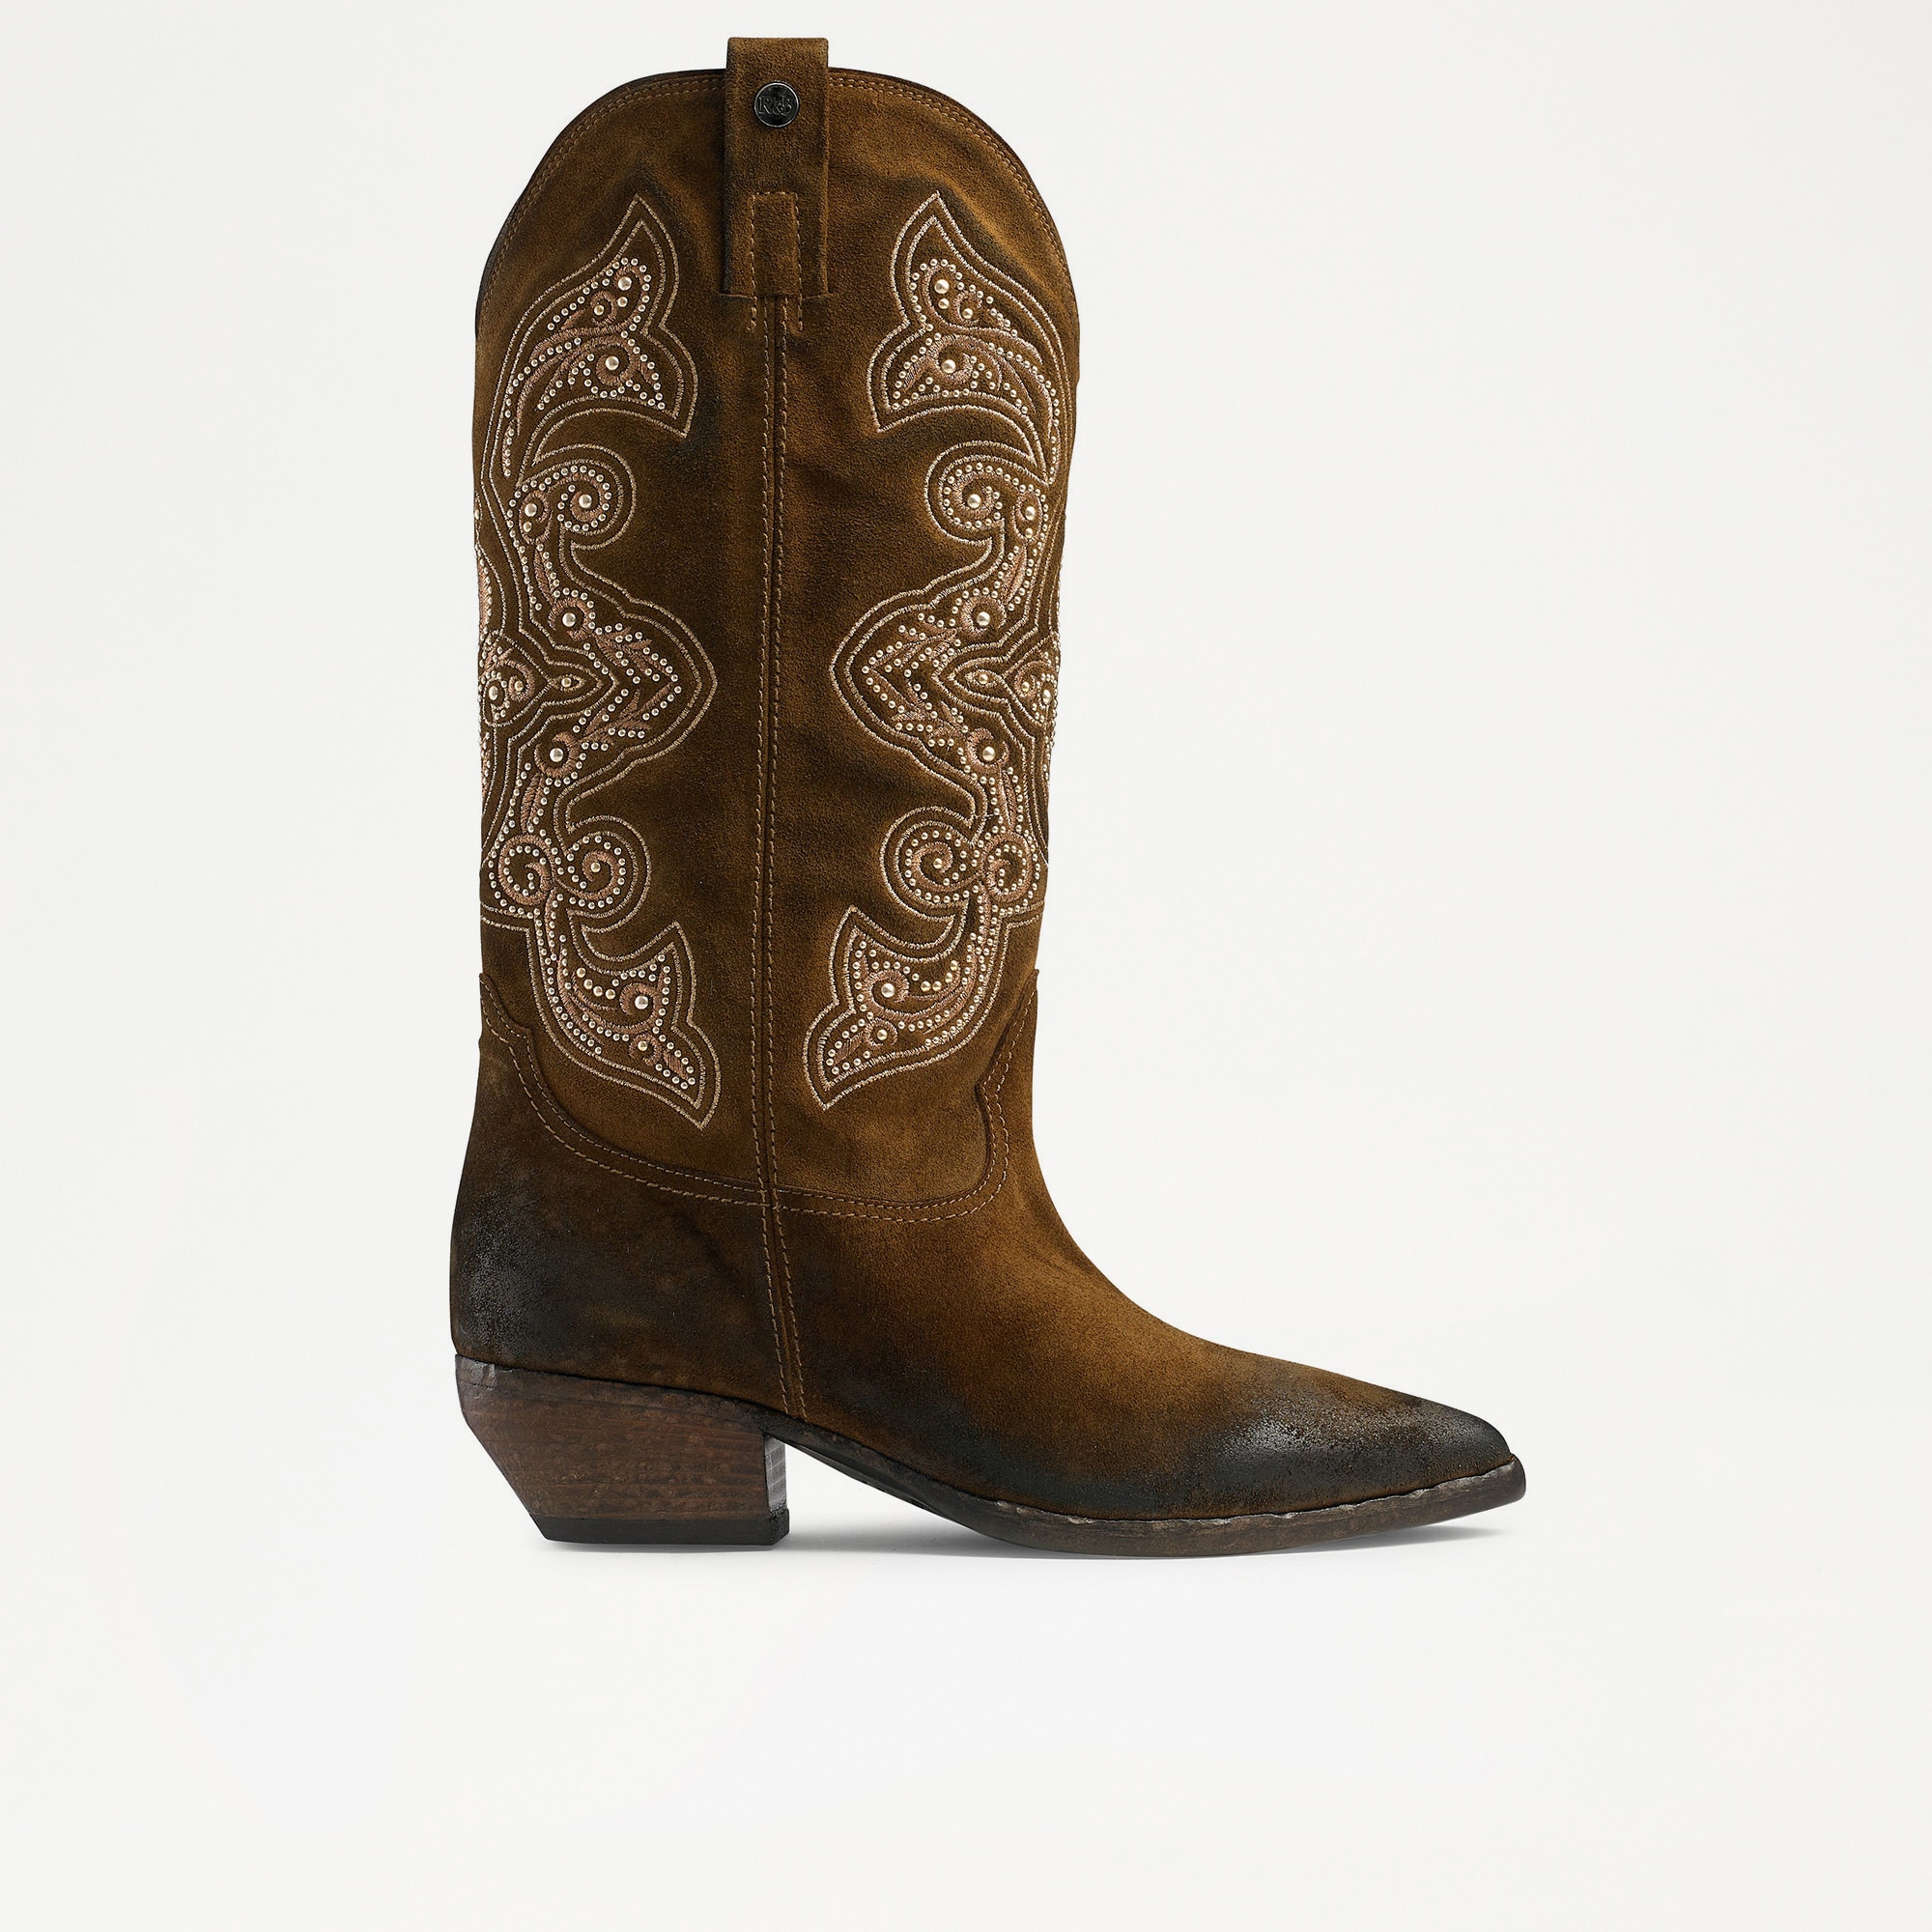 WILDWEST Embroidered Western in Tan Suede | Russell & Bromley